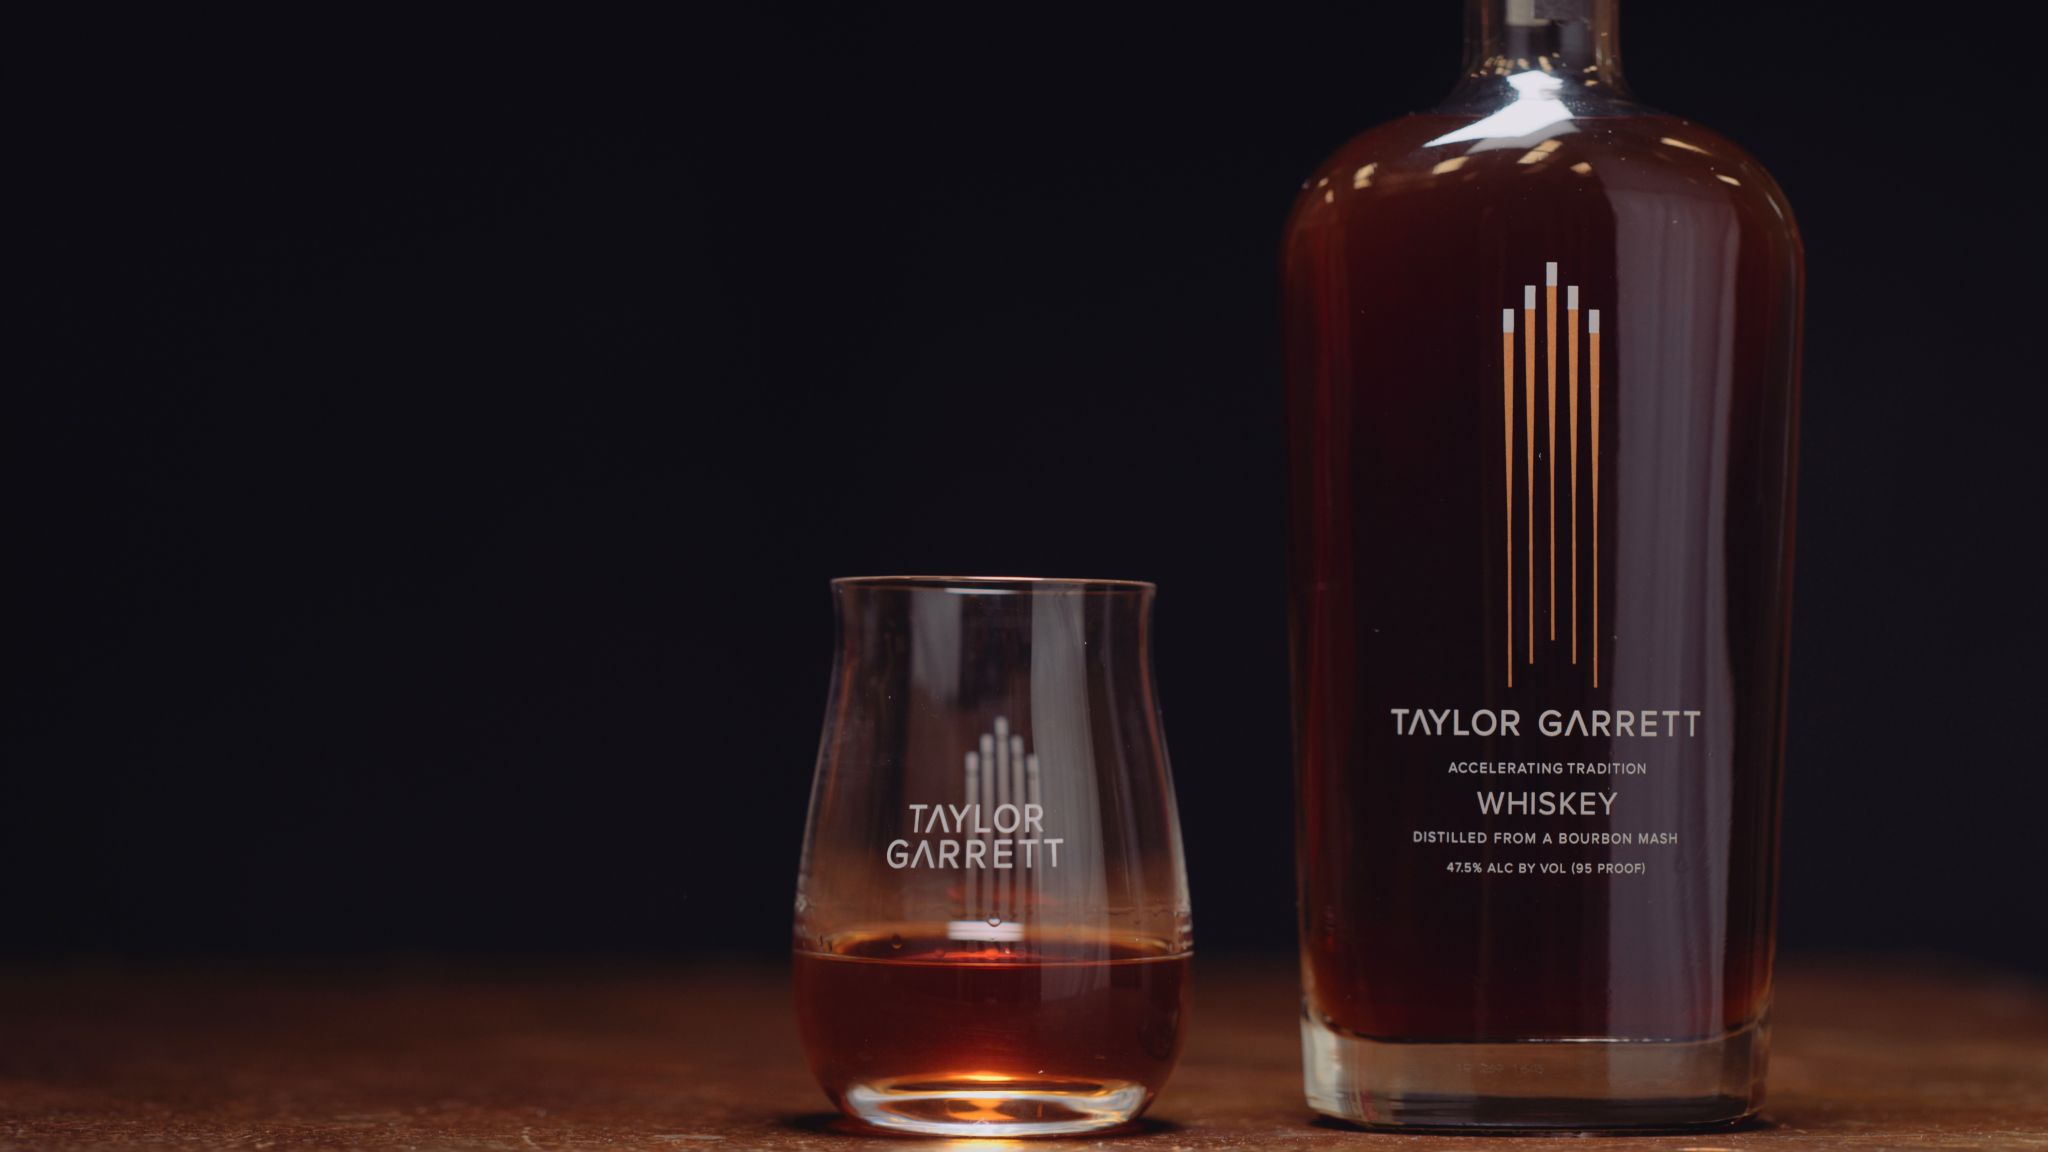 IU C&I Studios Portfolio Taylor Garrett Spirits Glass containing some whiskey as well as bottle on display on a wooden table